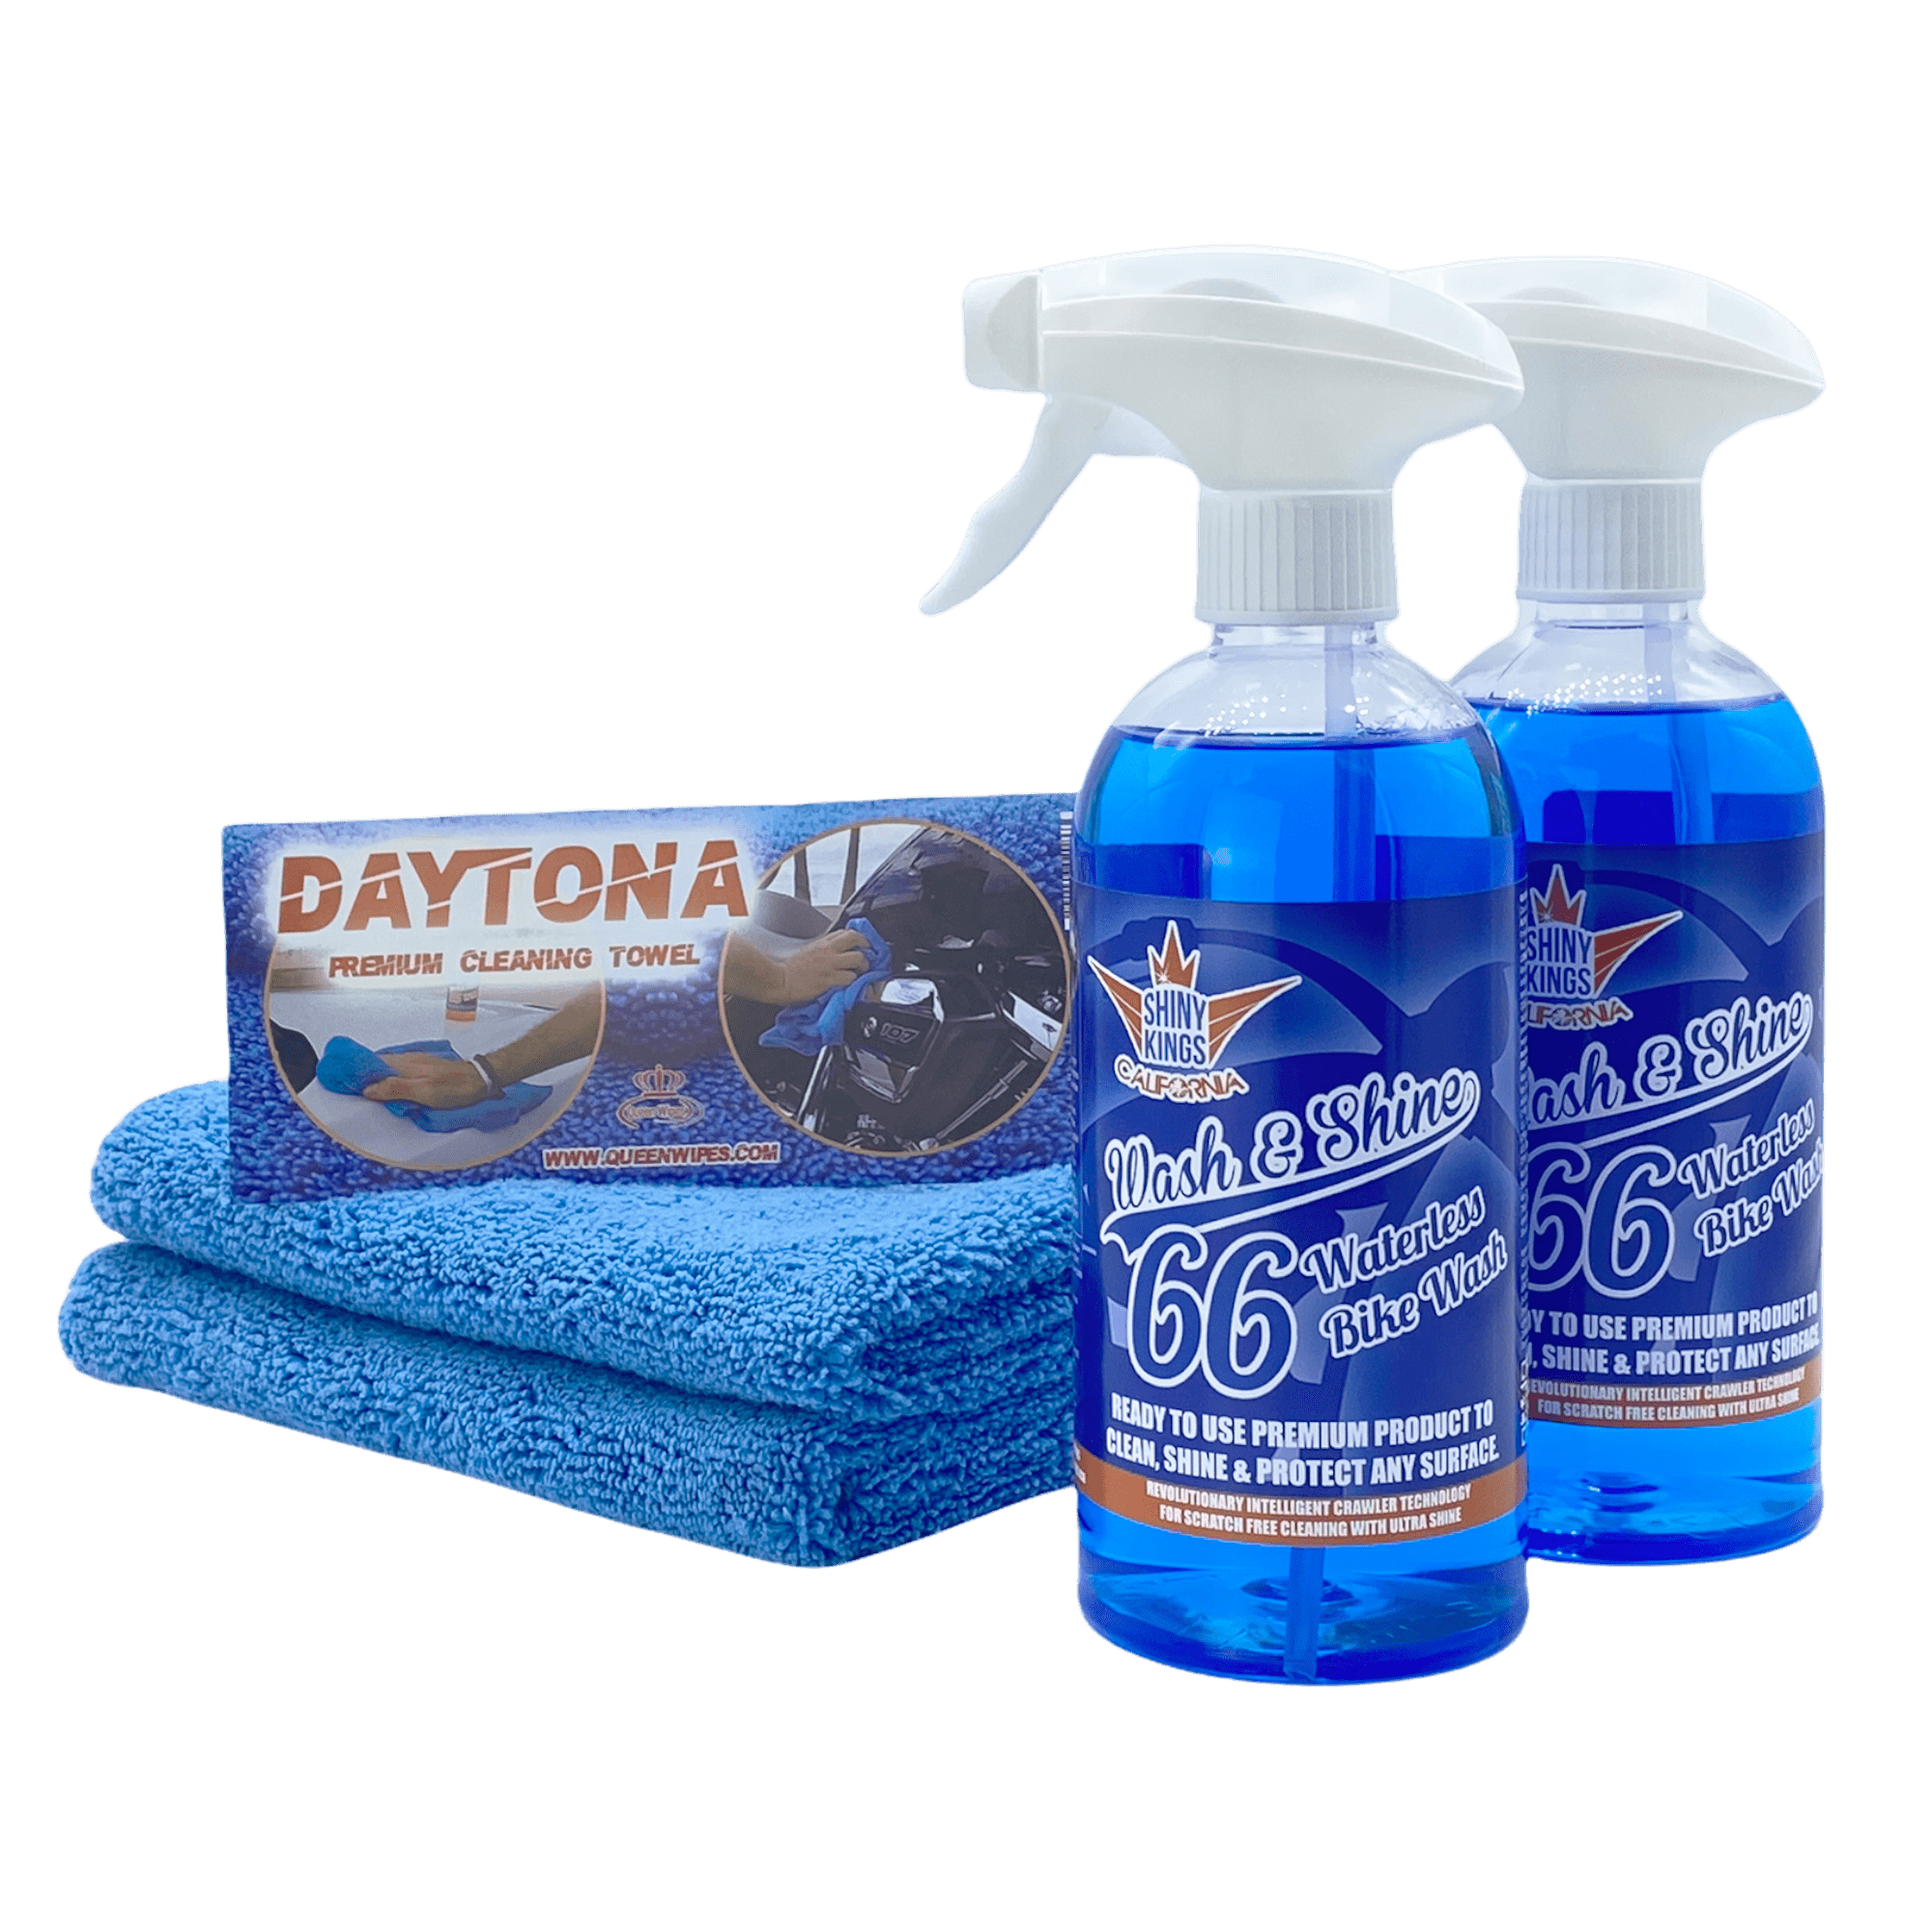 waterless motorcycle cleaner Wash&Shine 66 waterless bike wash 16.9 fl oz All in One All surfaces wash and wax quick detailer with intelligent crawler technology for scratch free cleaning